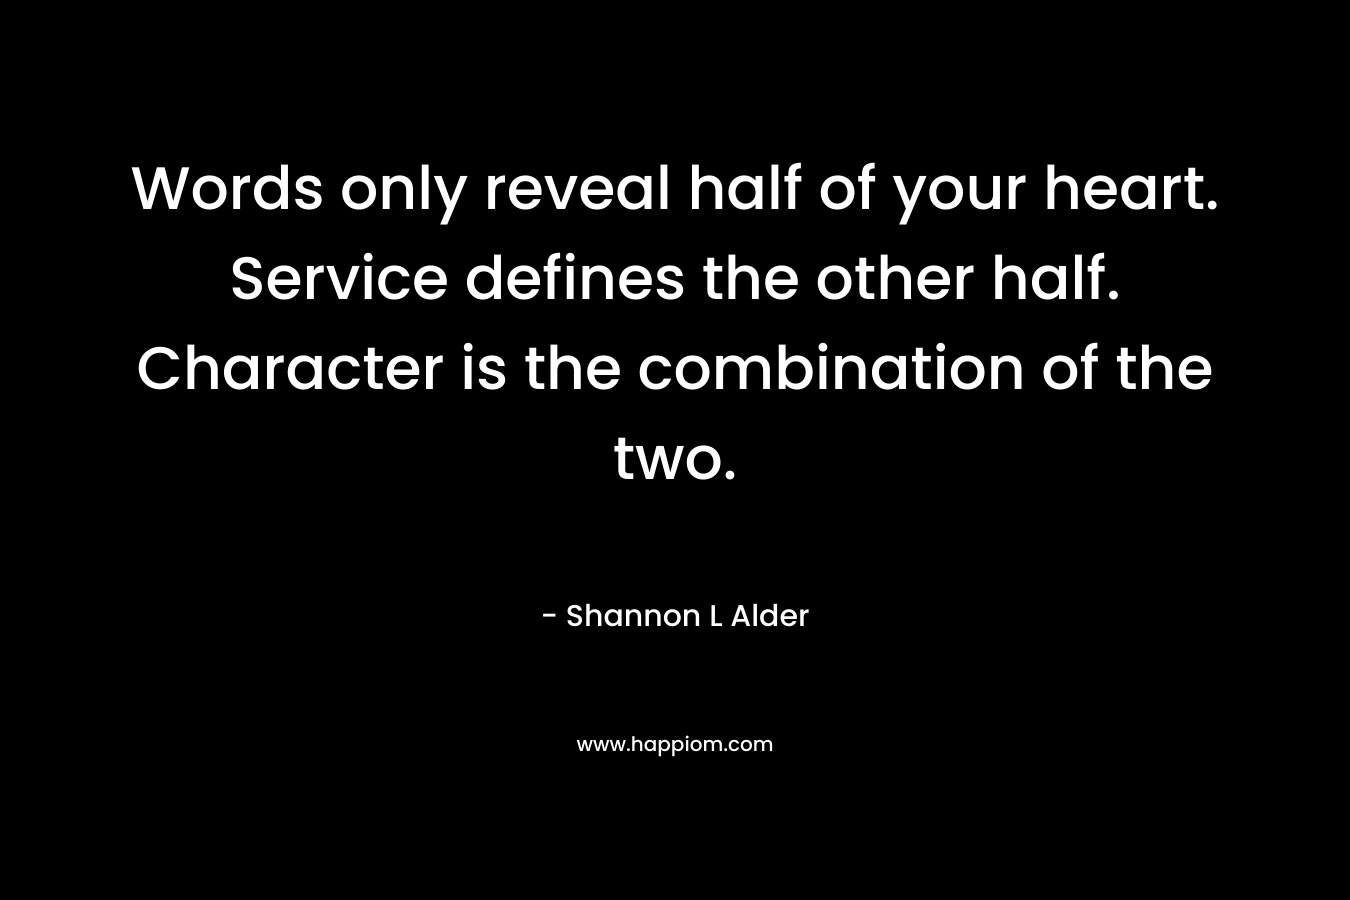 Words only reveal half of your heart. Service defines the other half. Character is the combination of the two.